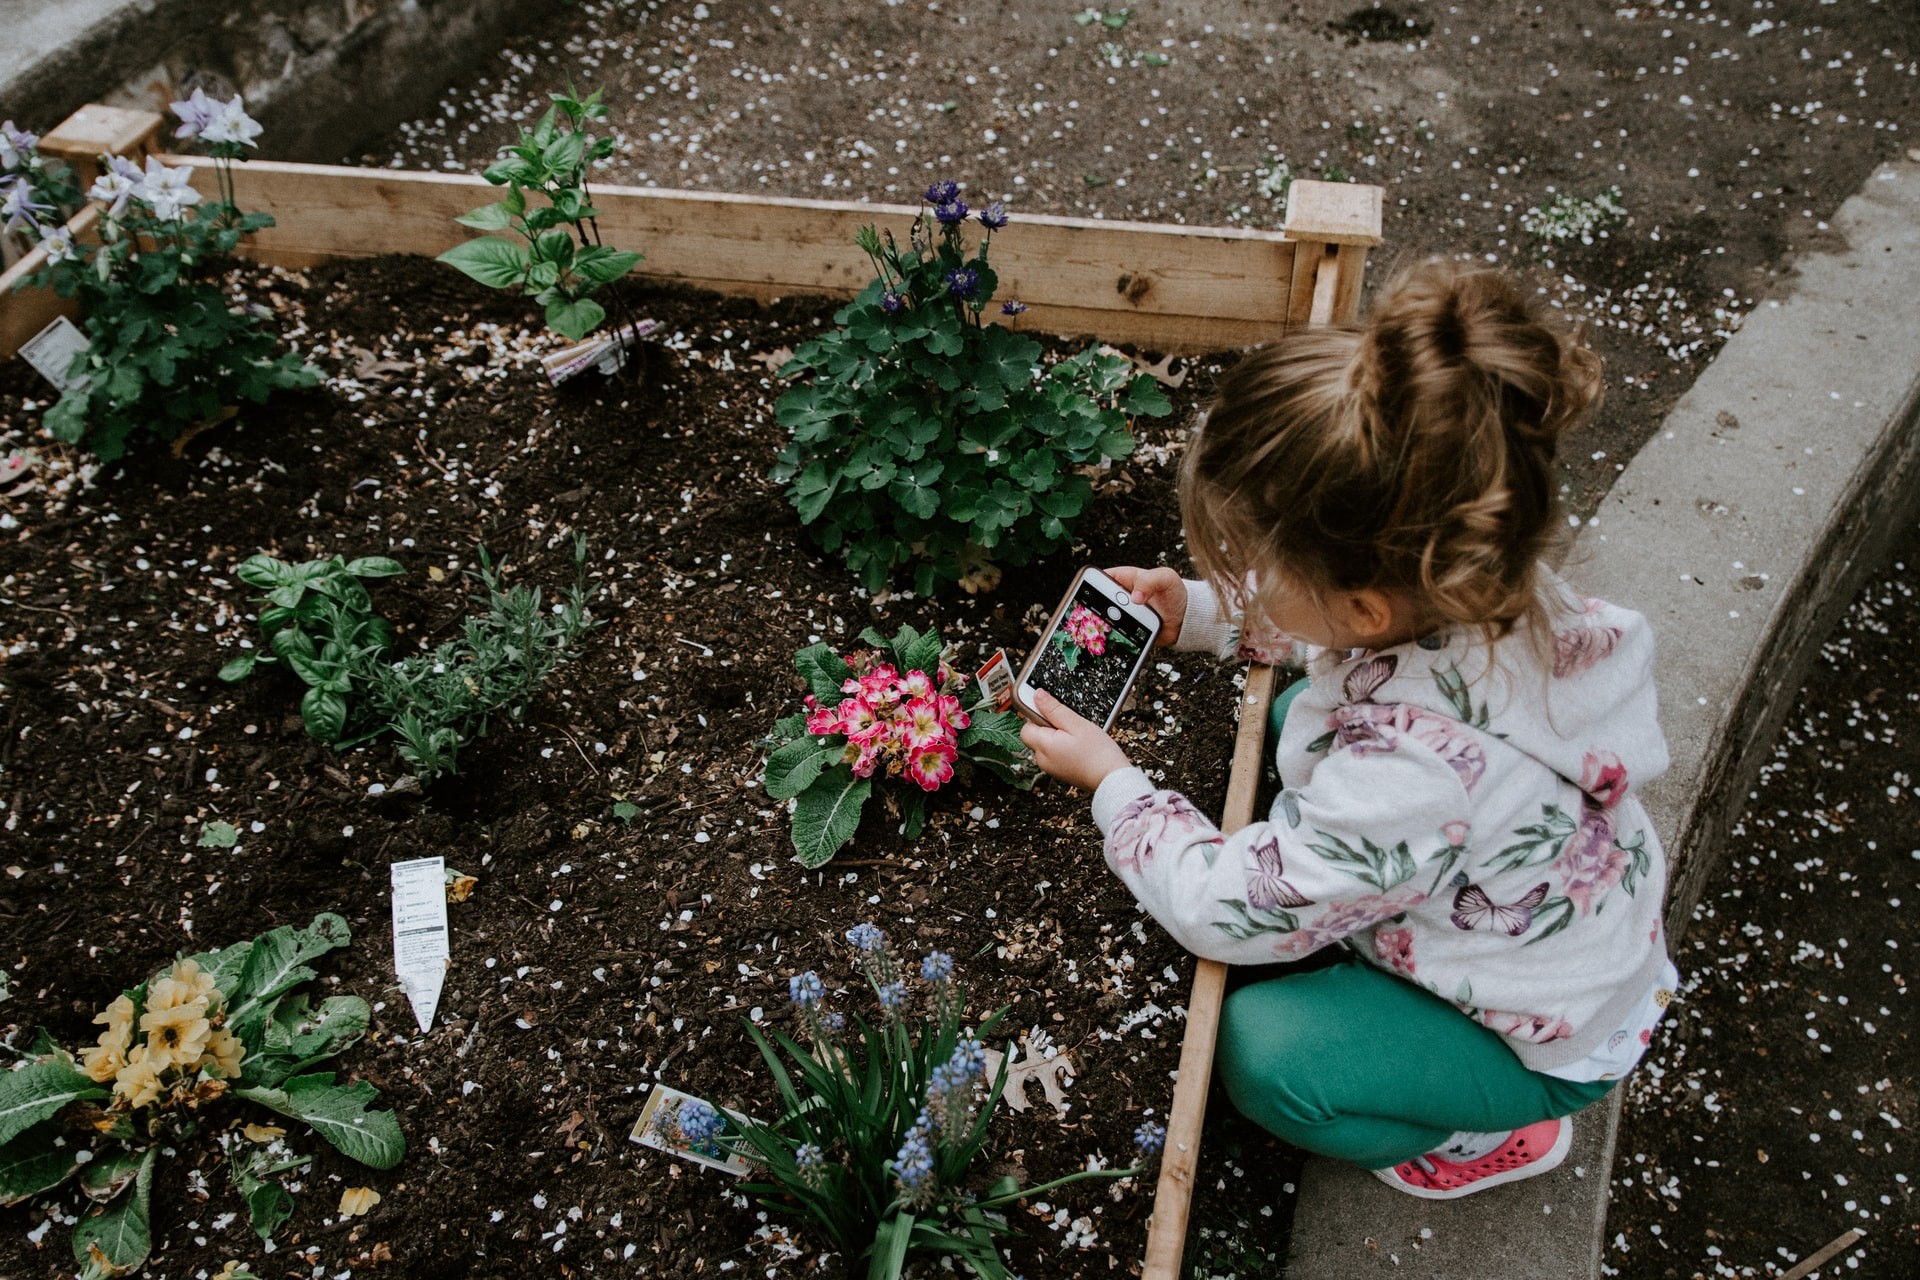 A young girl works in a garden filled with flowers.